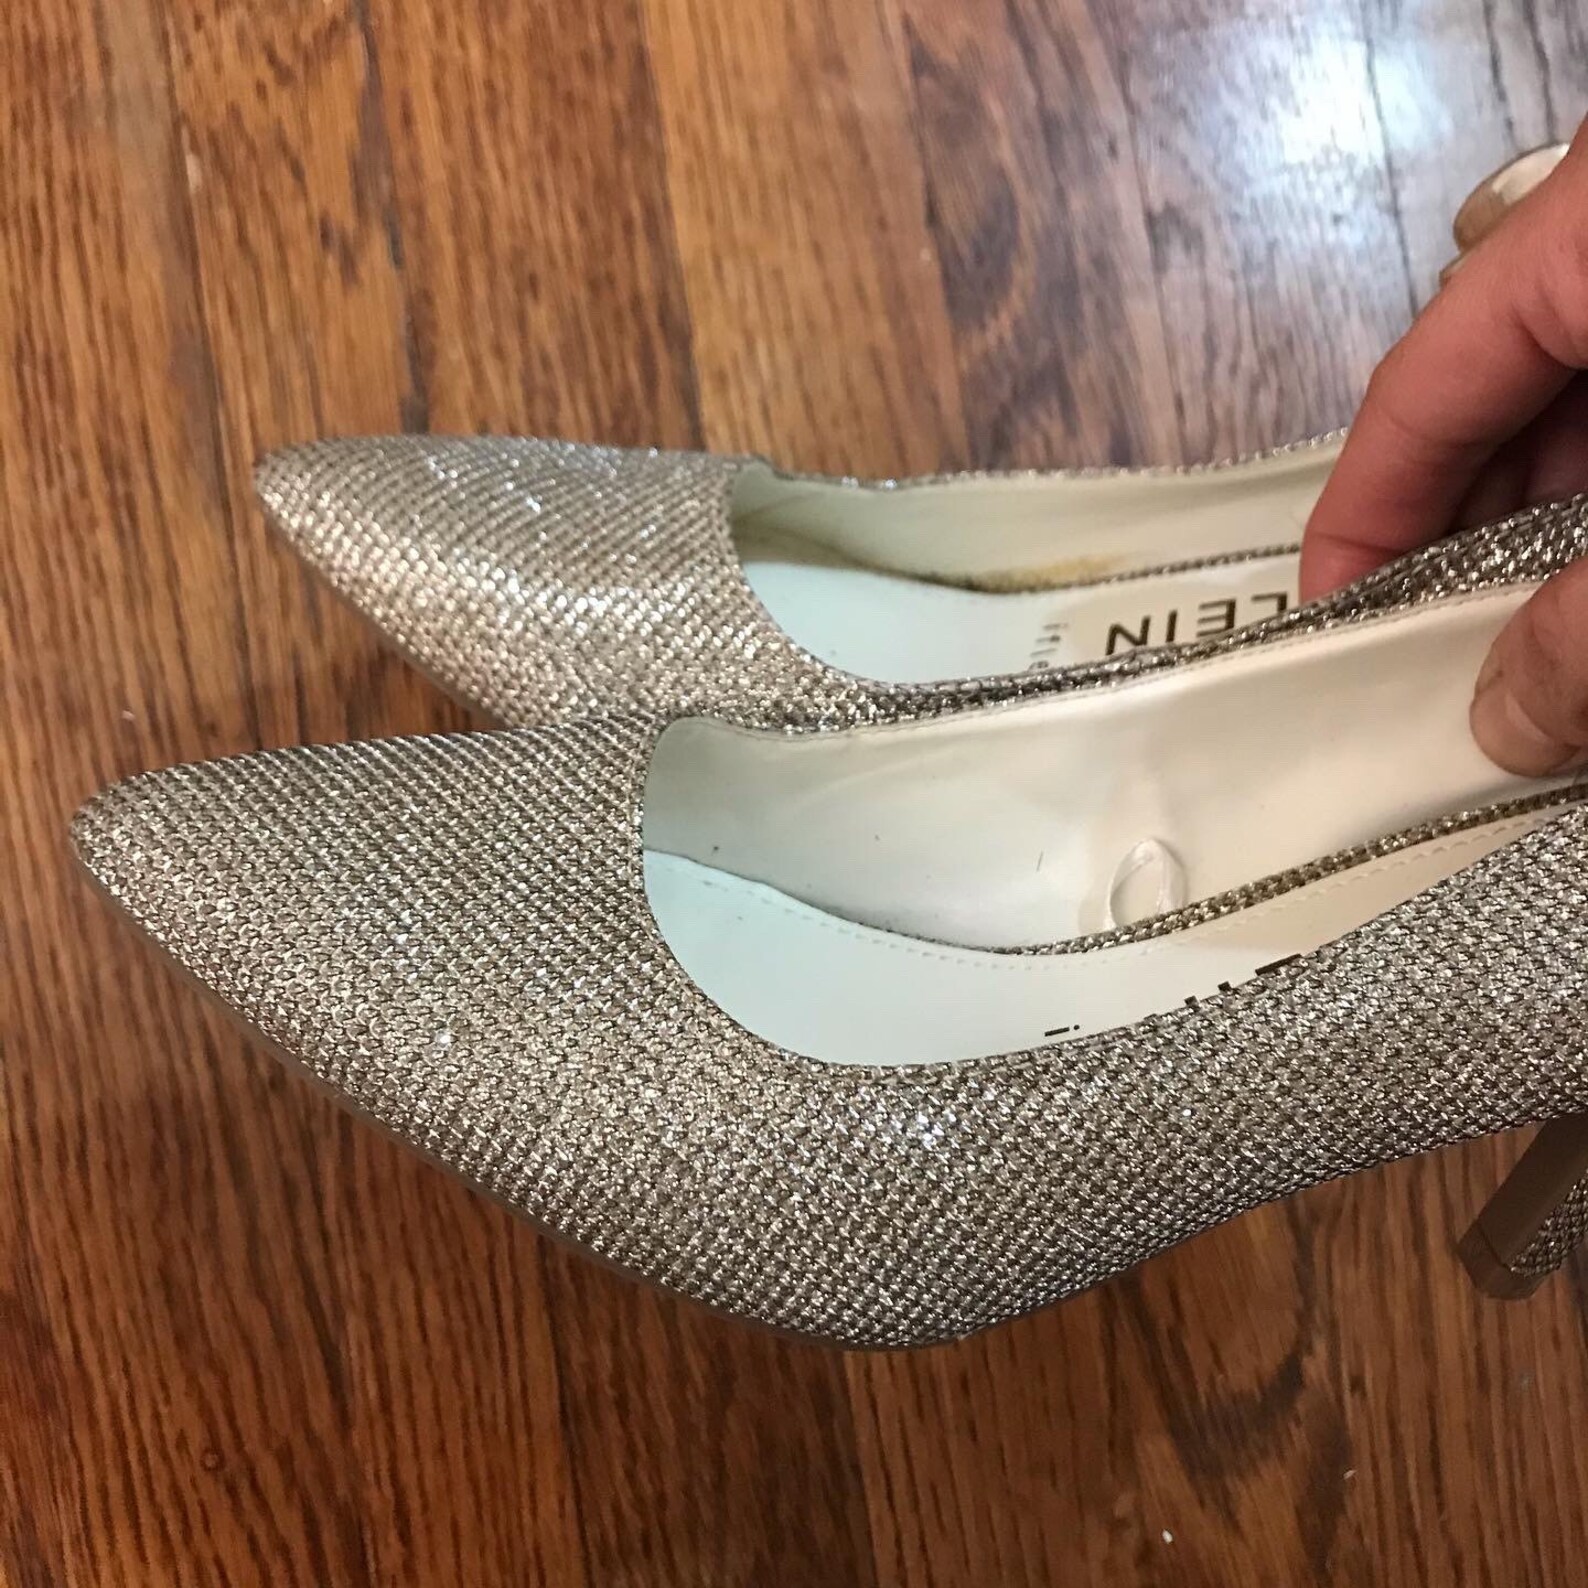 Silver lamé bombshell starlet pumps Anne Klein 50s 60s style | Etsy